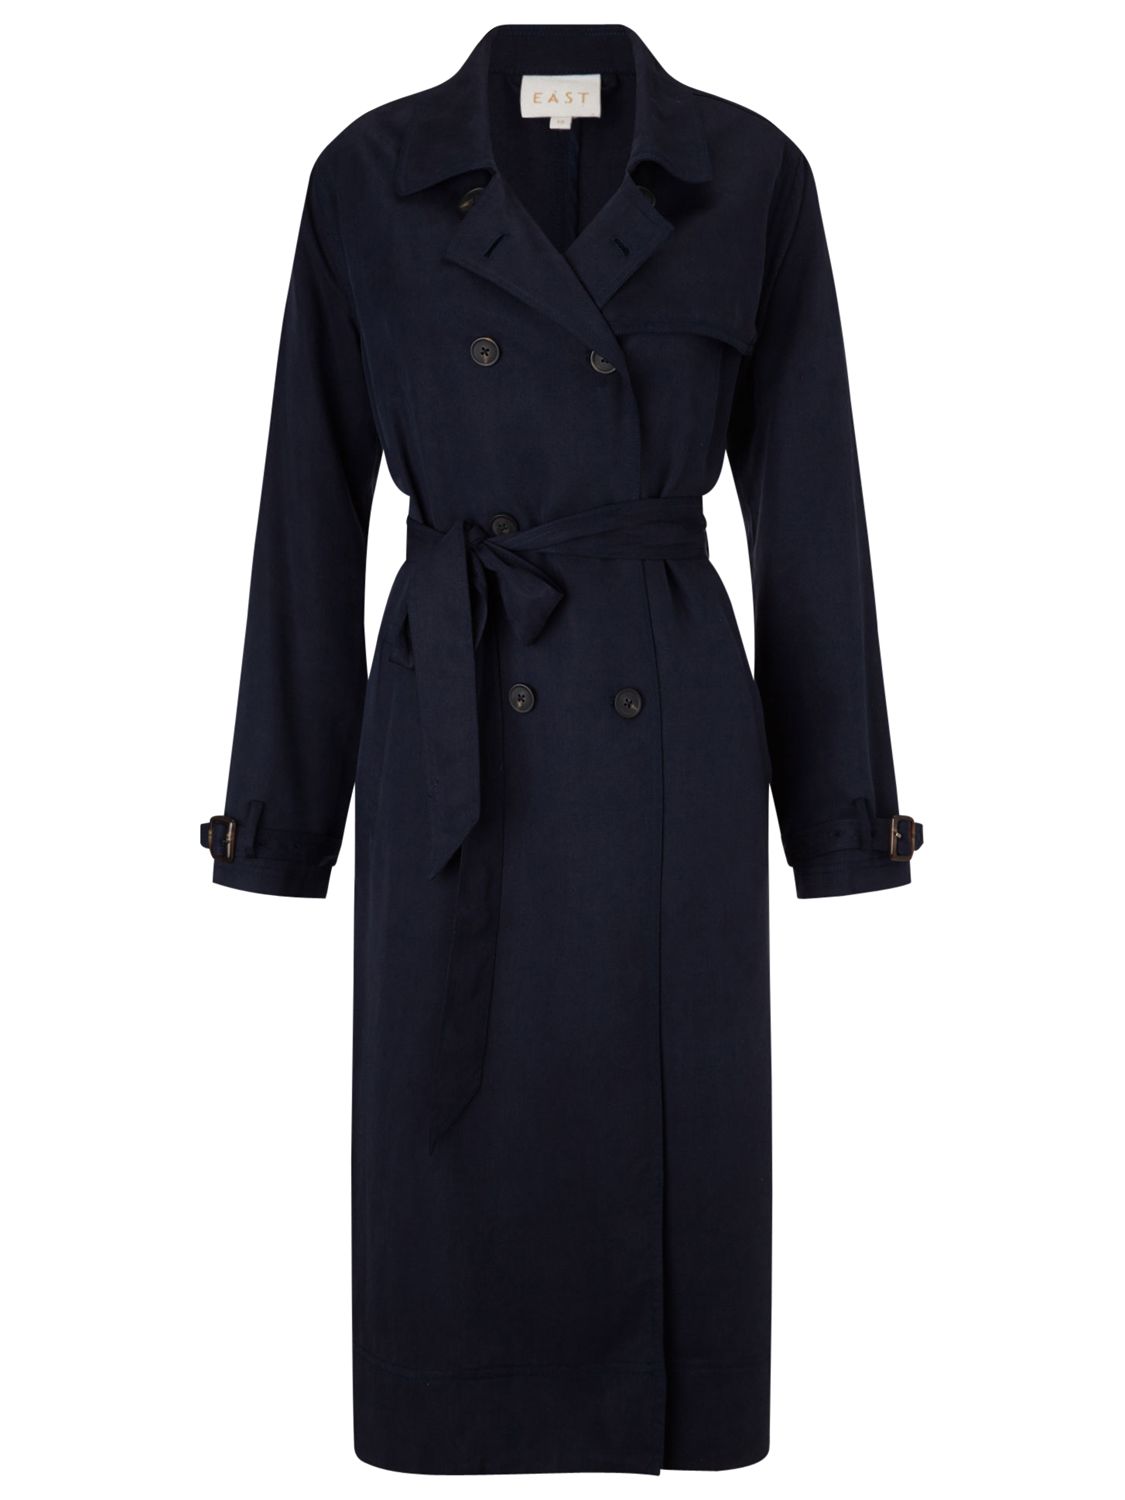 East Tencel Trench Coat, Ink at John Lewis & Partners